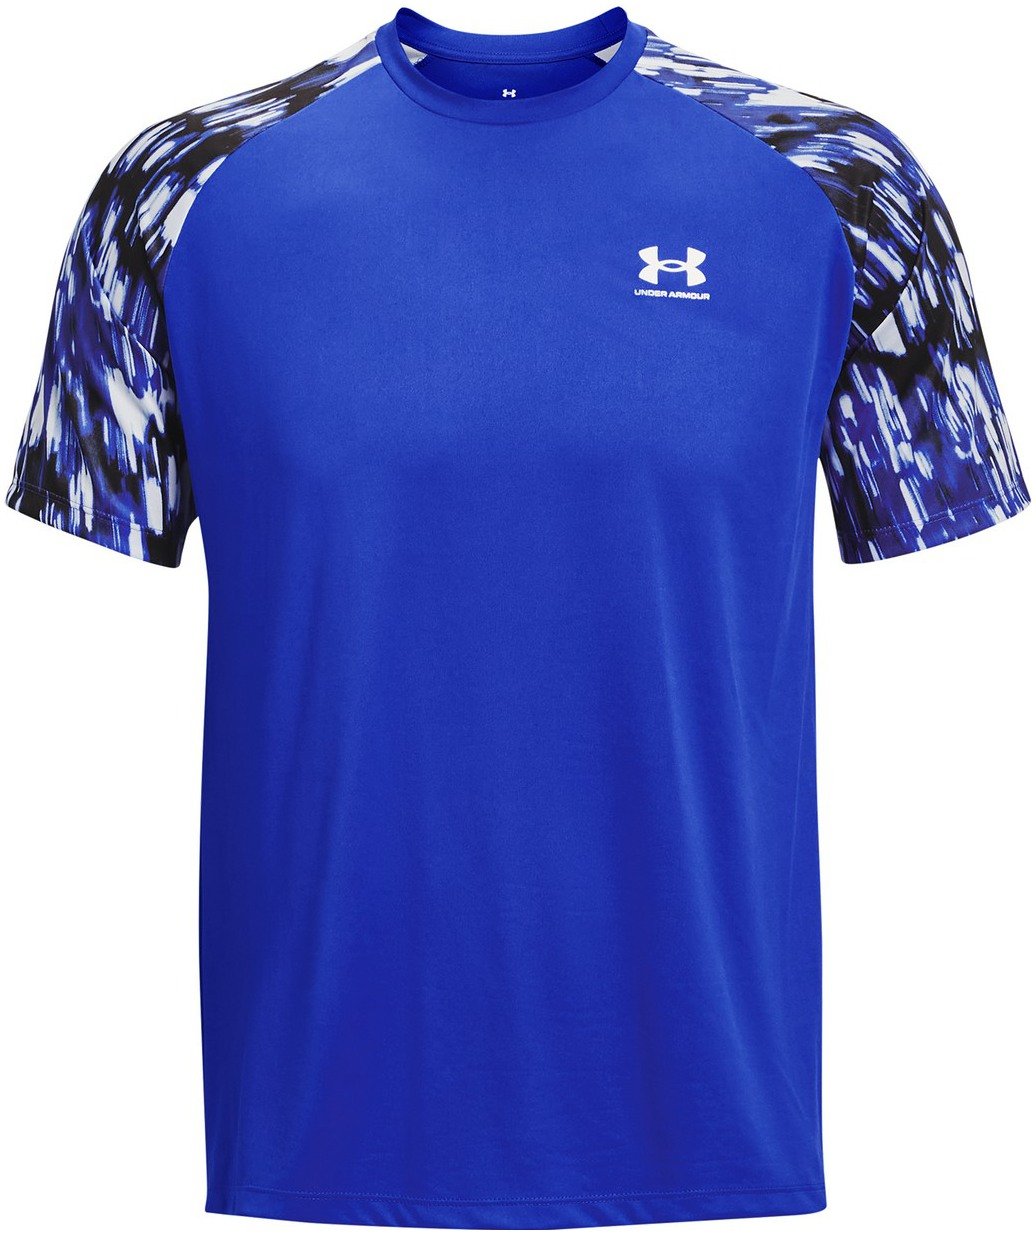 Under Armour TECH 2.0 PRINTED SS